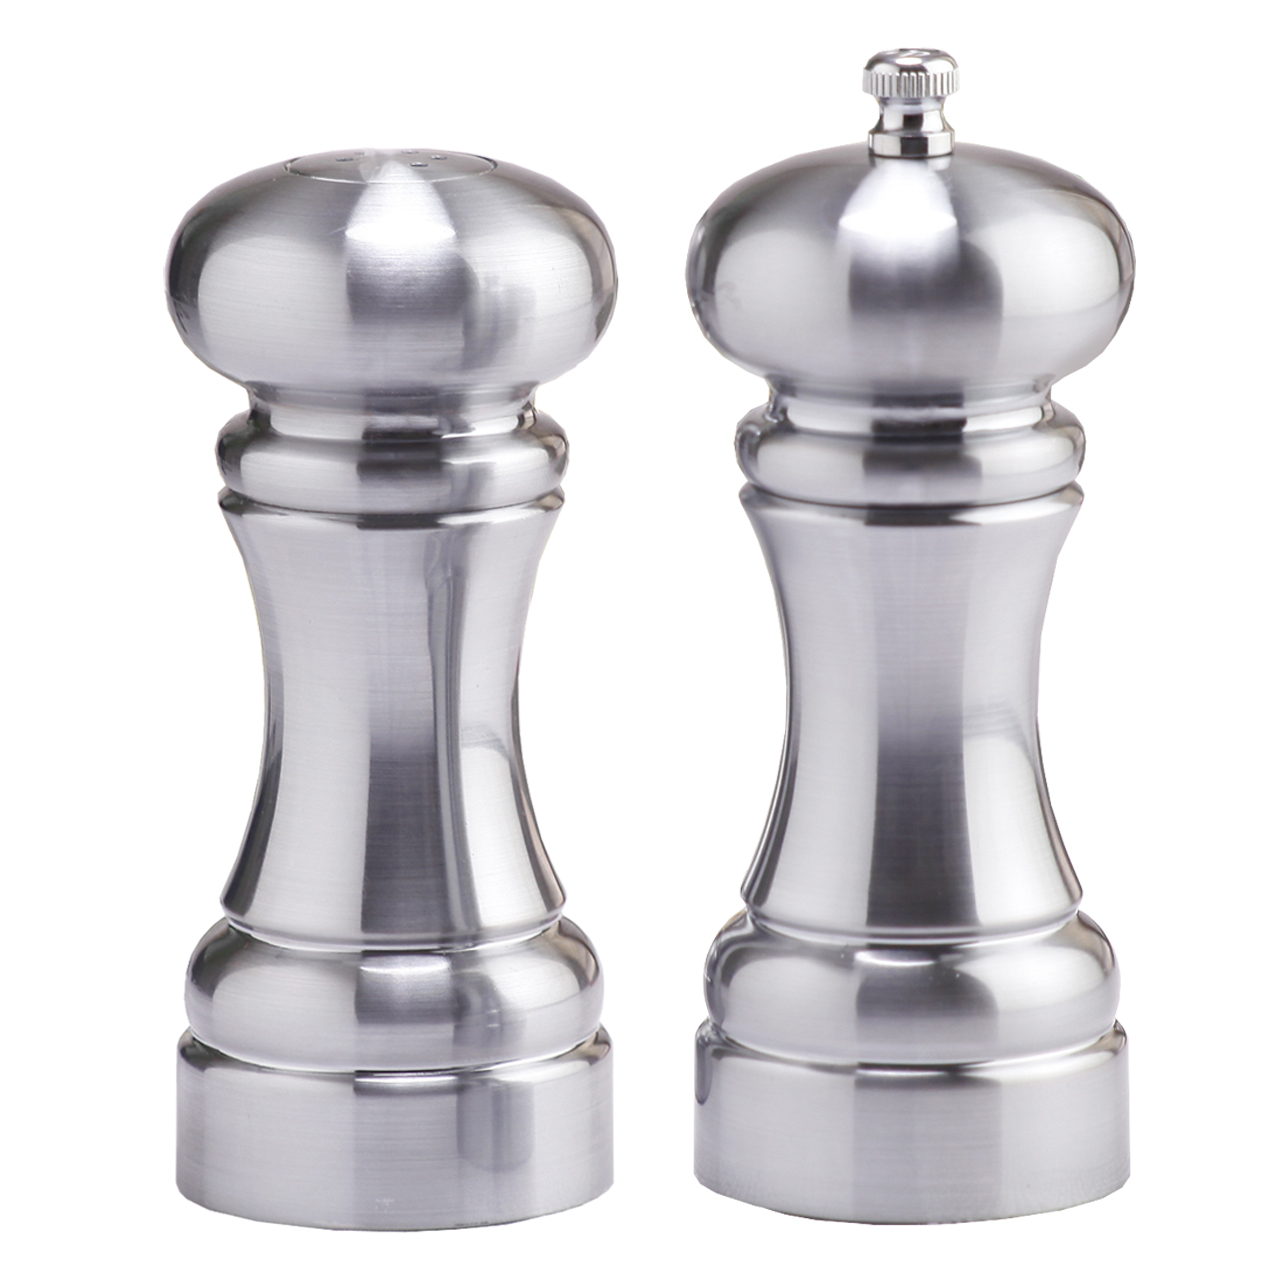 Picture of Chef Specialties 94500 5 Inch - 13cm WestinMatte Chrome Finish Pepper Mill Salt Shaker Set